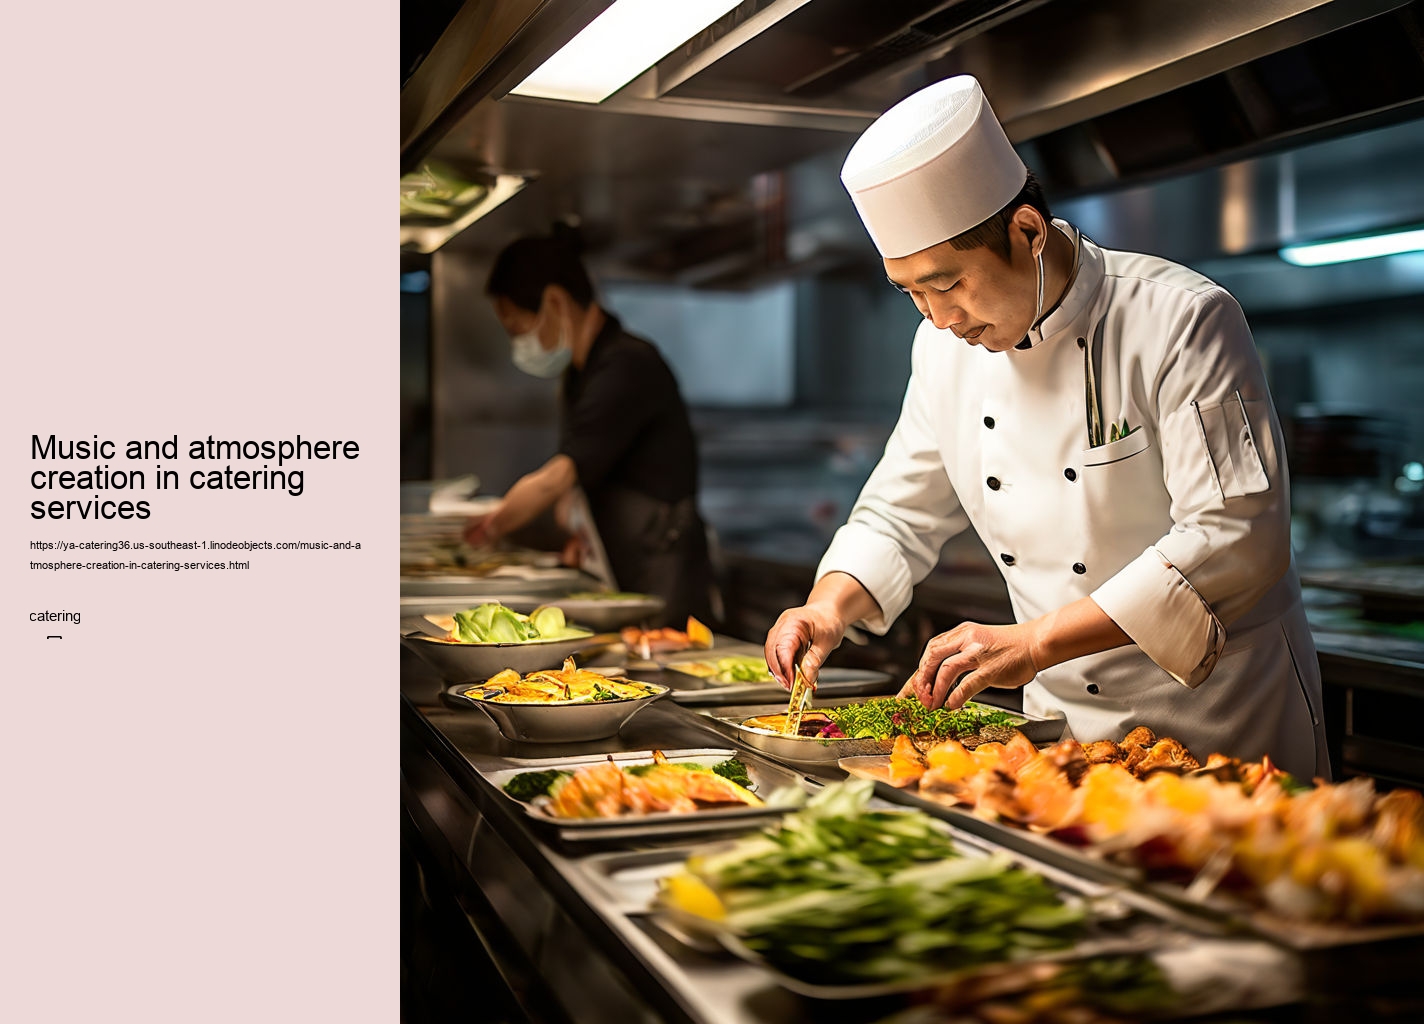 Music and atmosphere creation in catering services